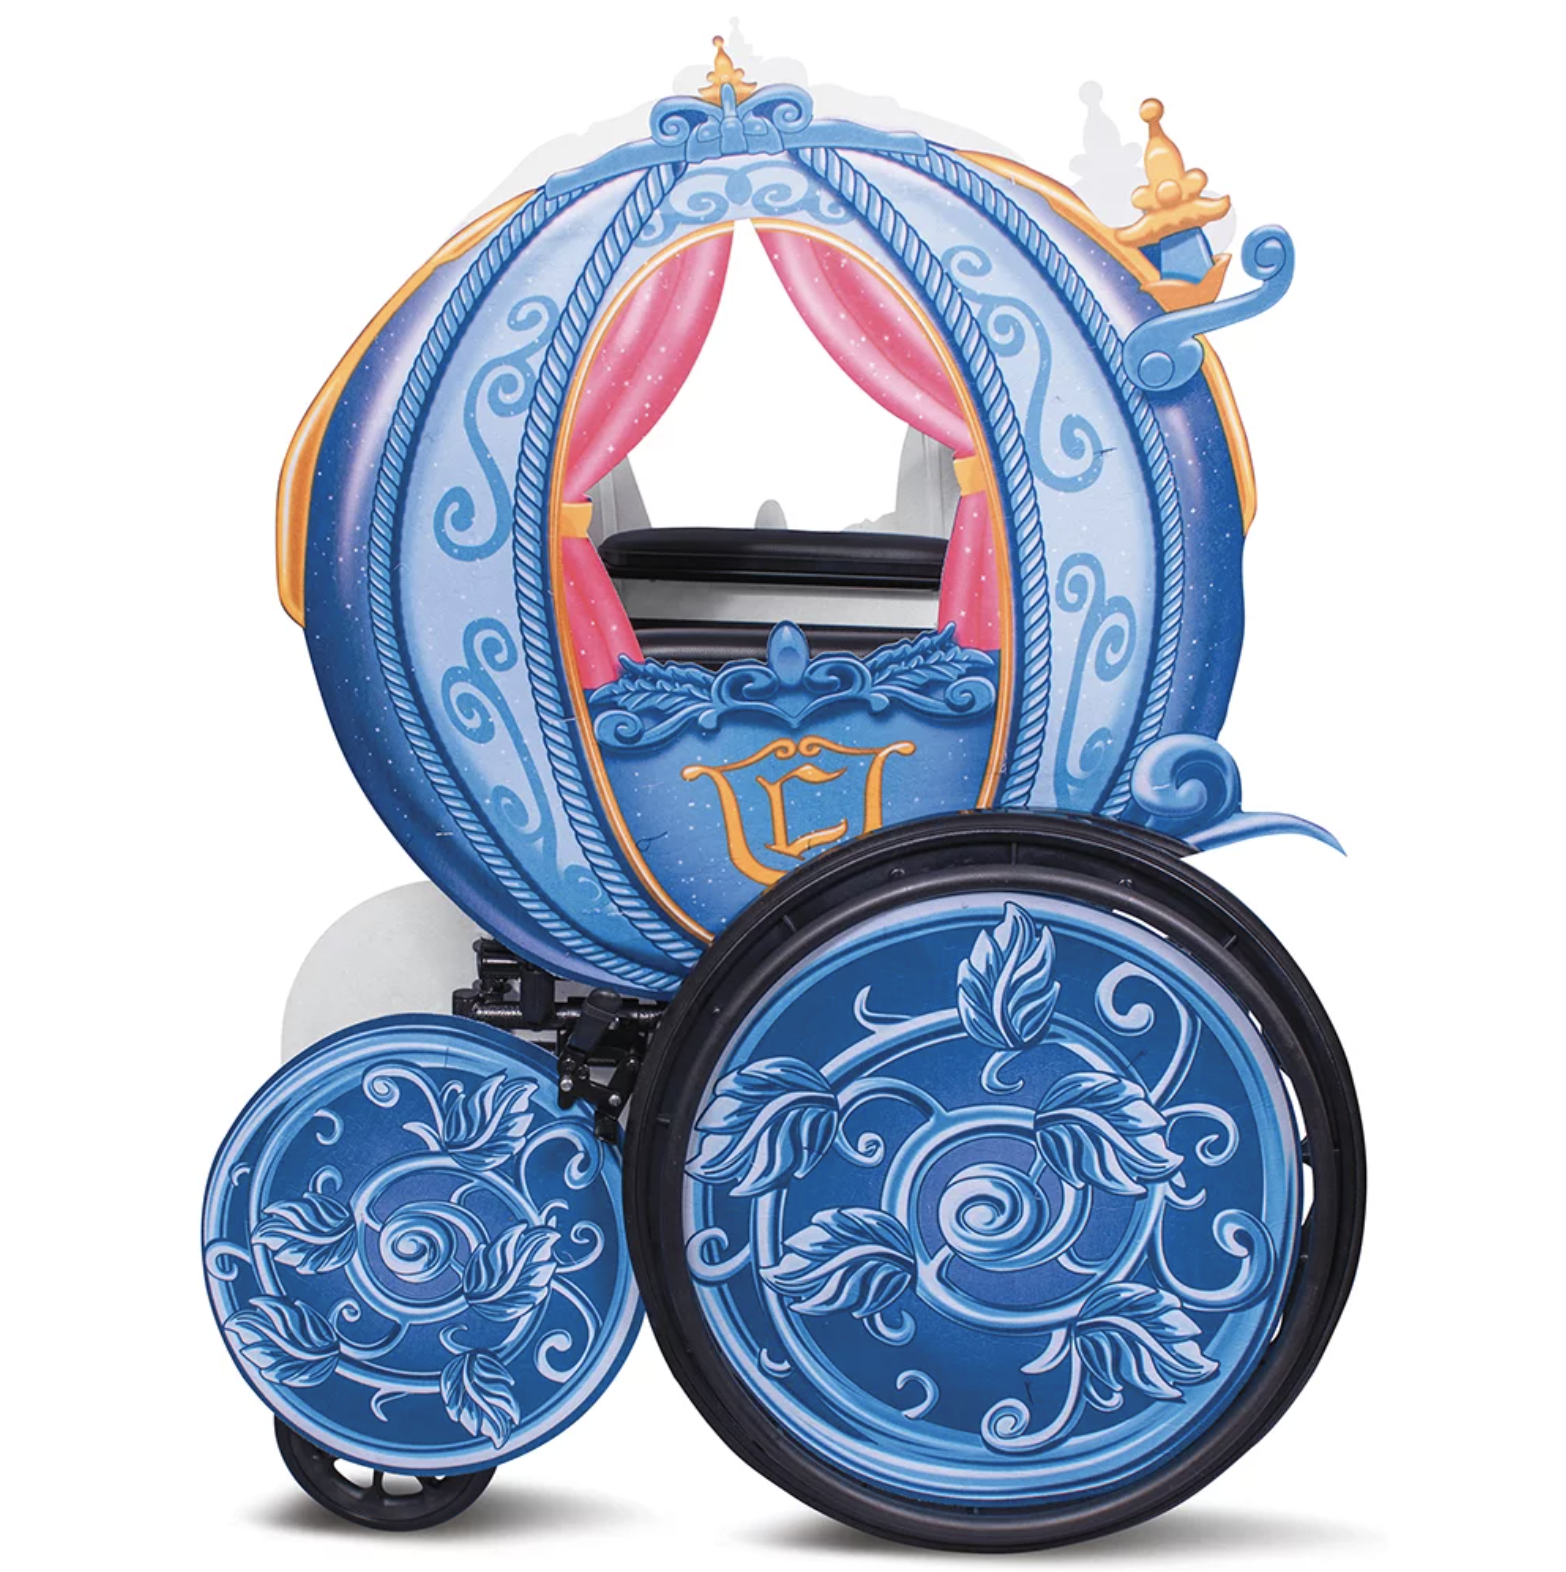 Cinderella carriage wheelchair cover that goes over toxp and on wheels